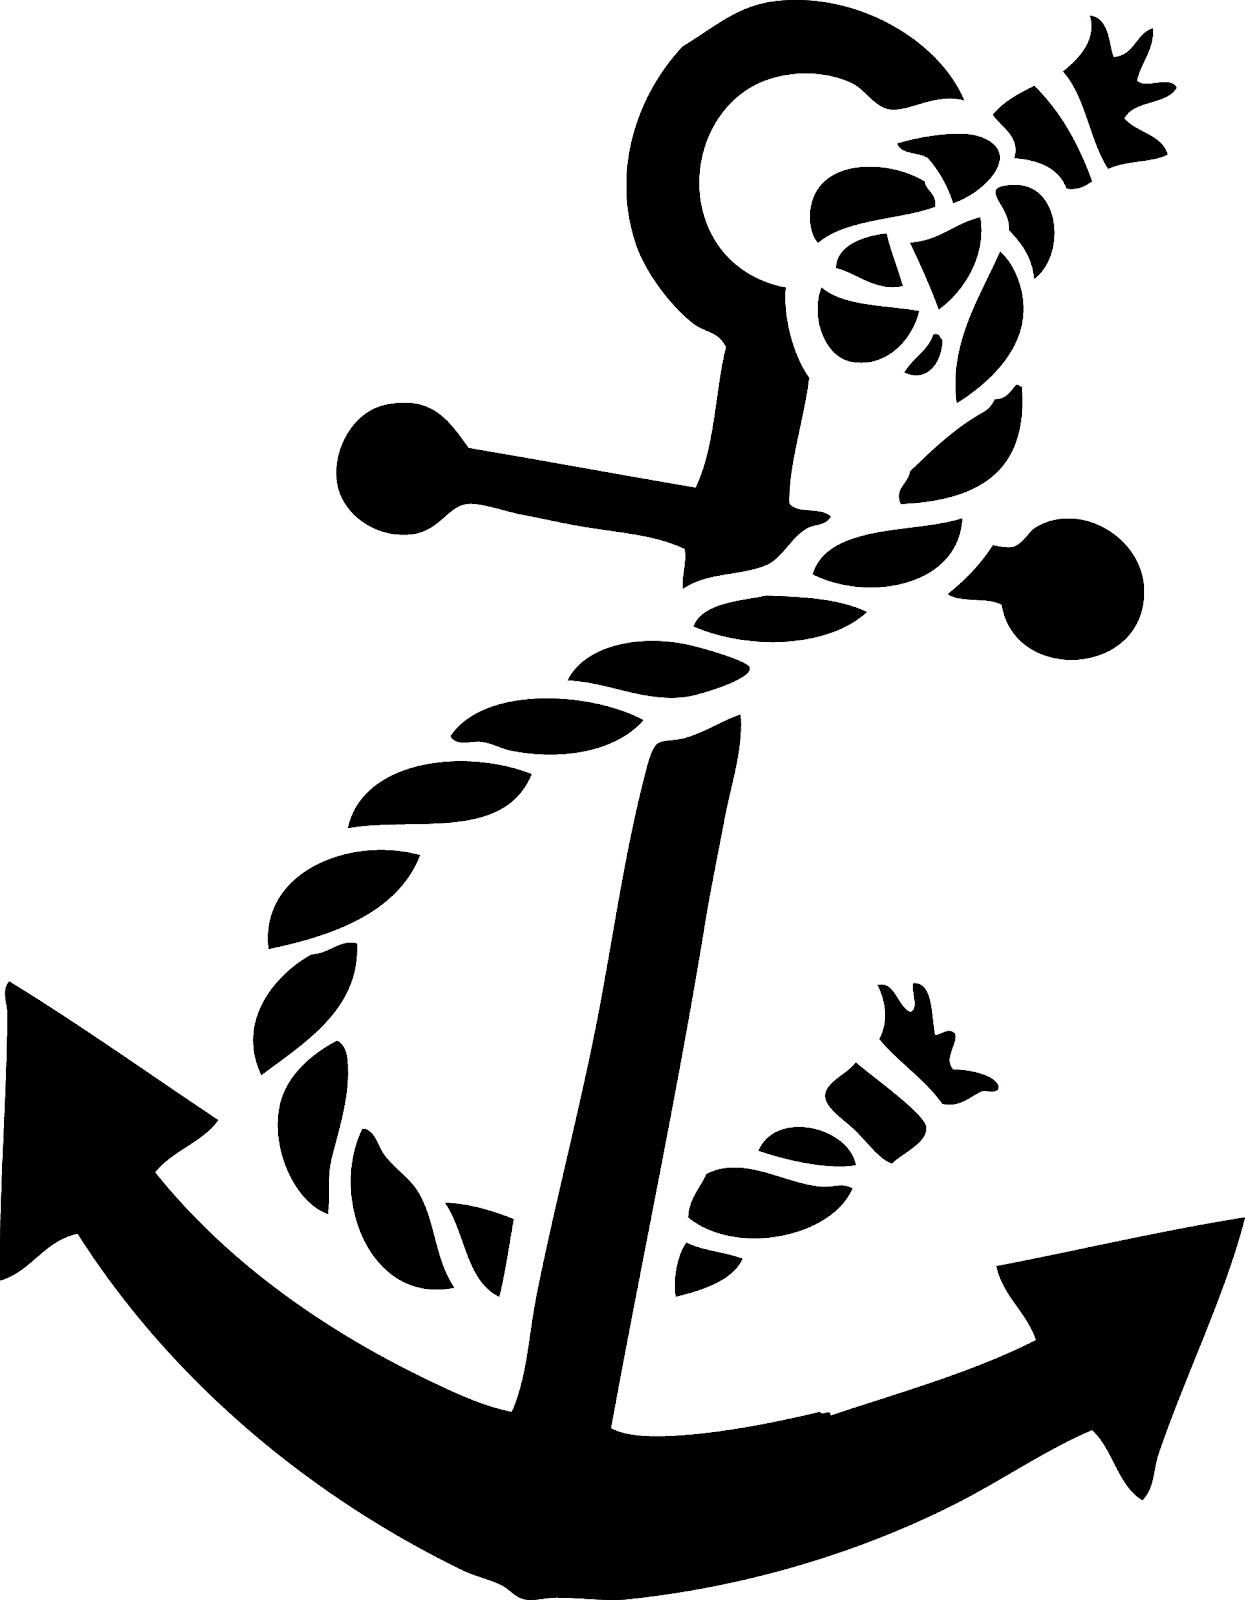 Anchor   Free Images At Clker Com   Vector Clip Art Online Royalty